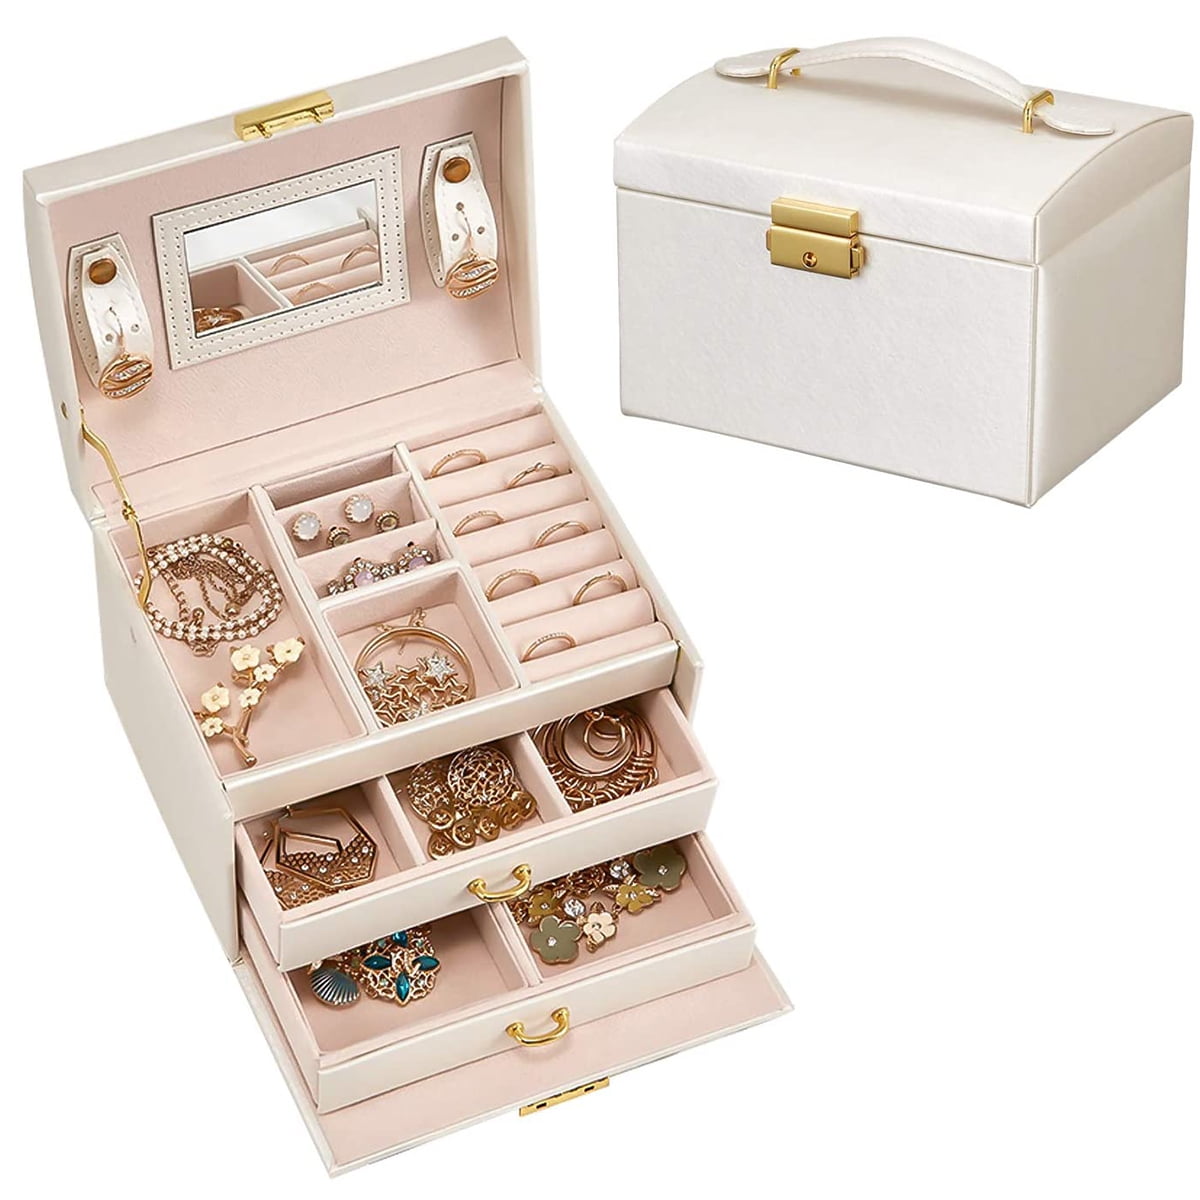 Jewelry Box Jewelry Organizer Box Display Storage Case Holder with Two Layers Lock Mirror Women Girls Leather Jewelry Box for Earrings Rings Necklaces Bracelets Earrings Gift White 